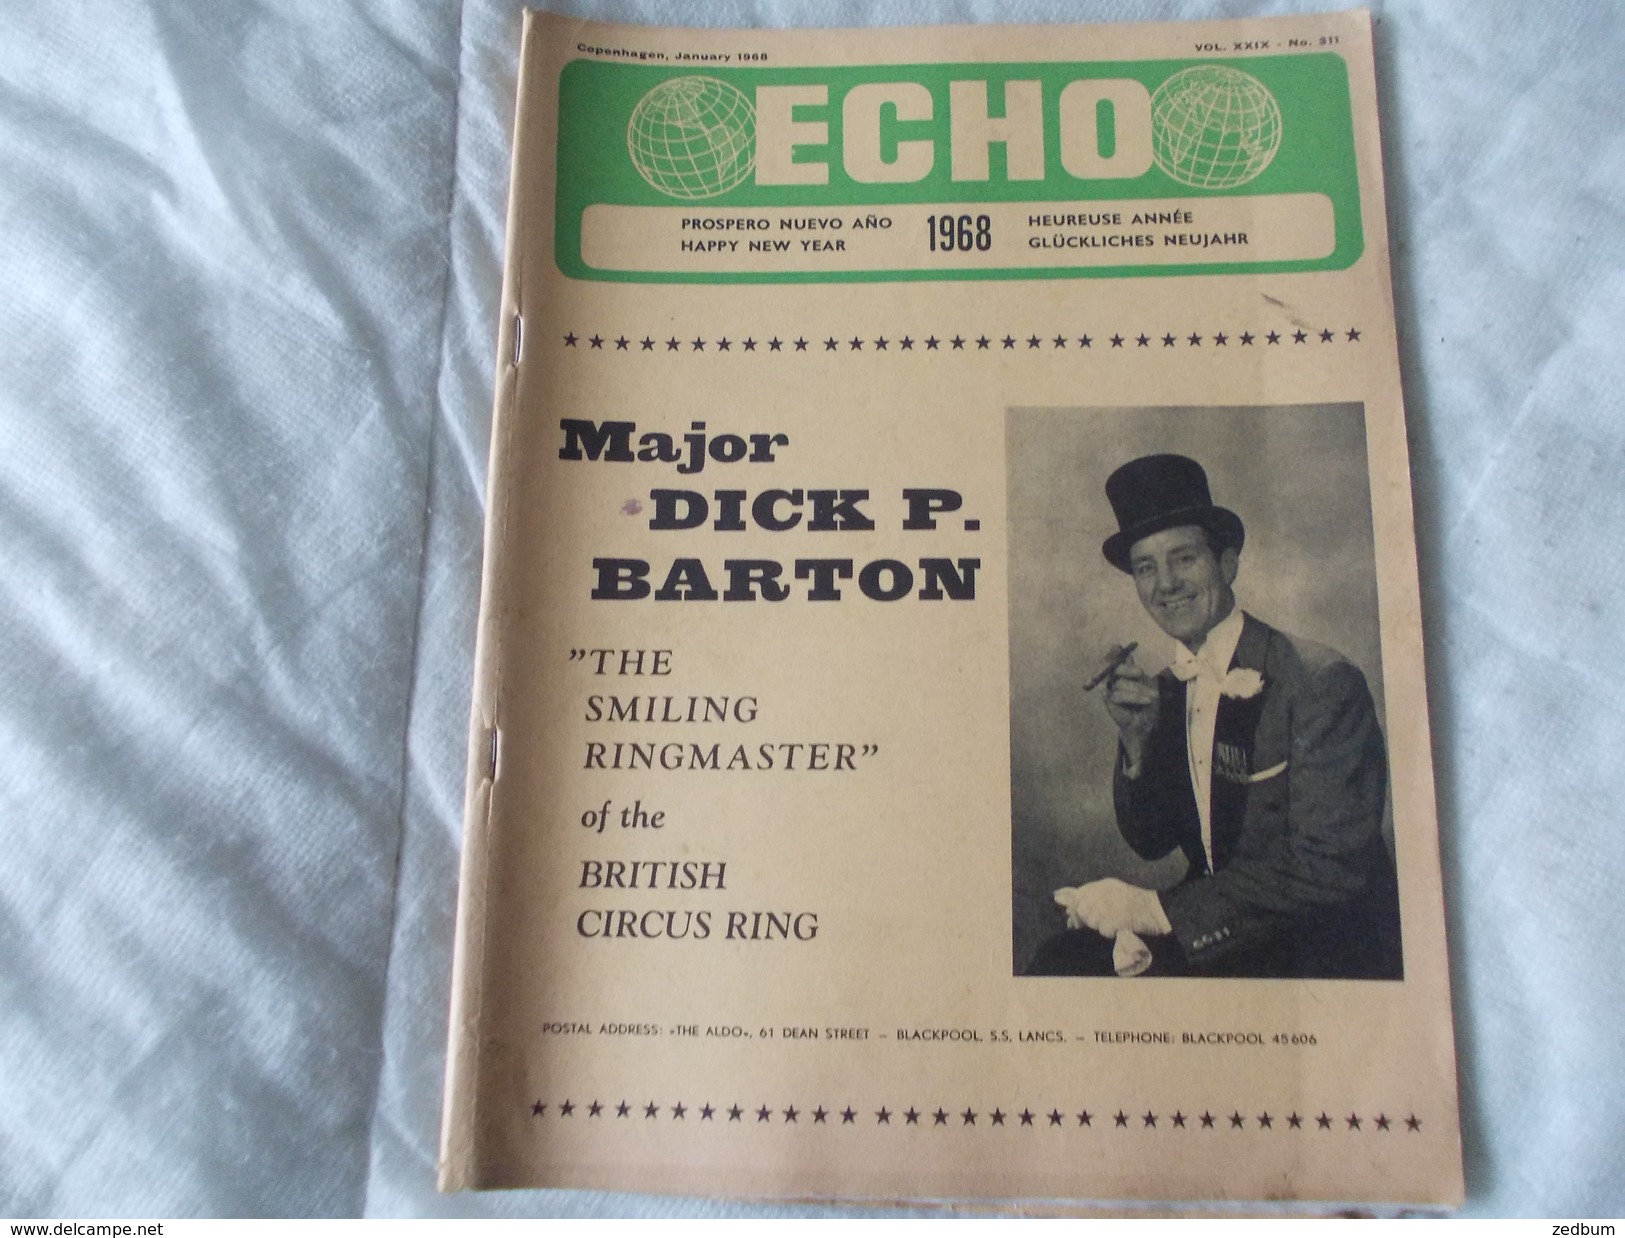 ECHO LTD Professional Circus And Variety Journal Independent International N° 311 January 1968 - Divertissement